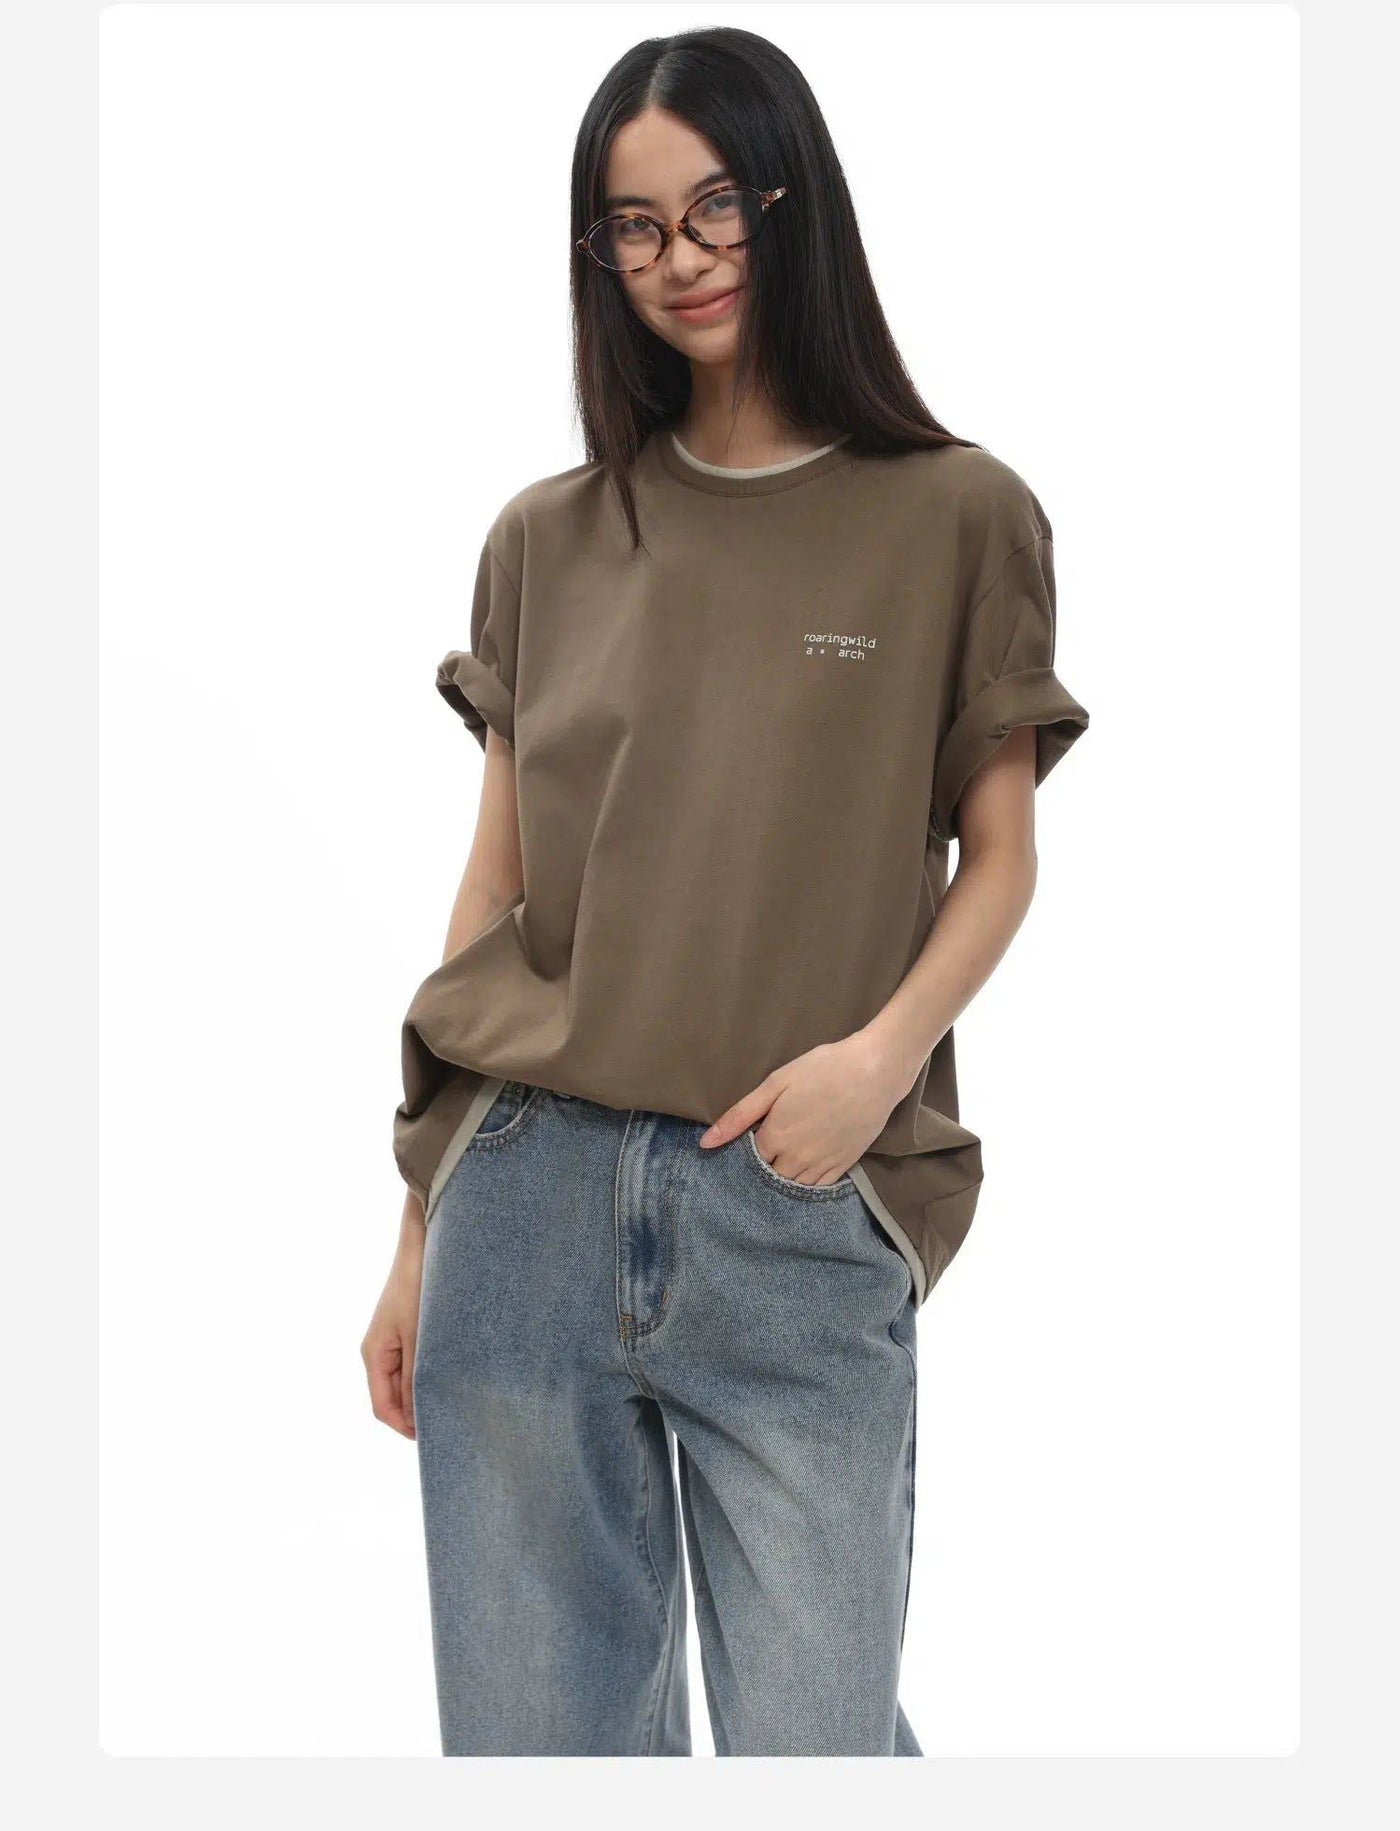 Layer Comfty Casual T-Shirt Korean Street Fashion T-Shirt By Roaring Wild Shop Online at OH Vault